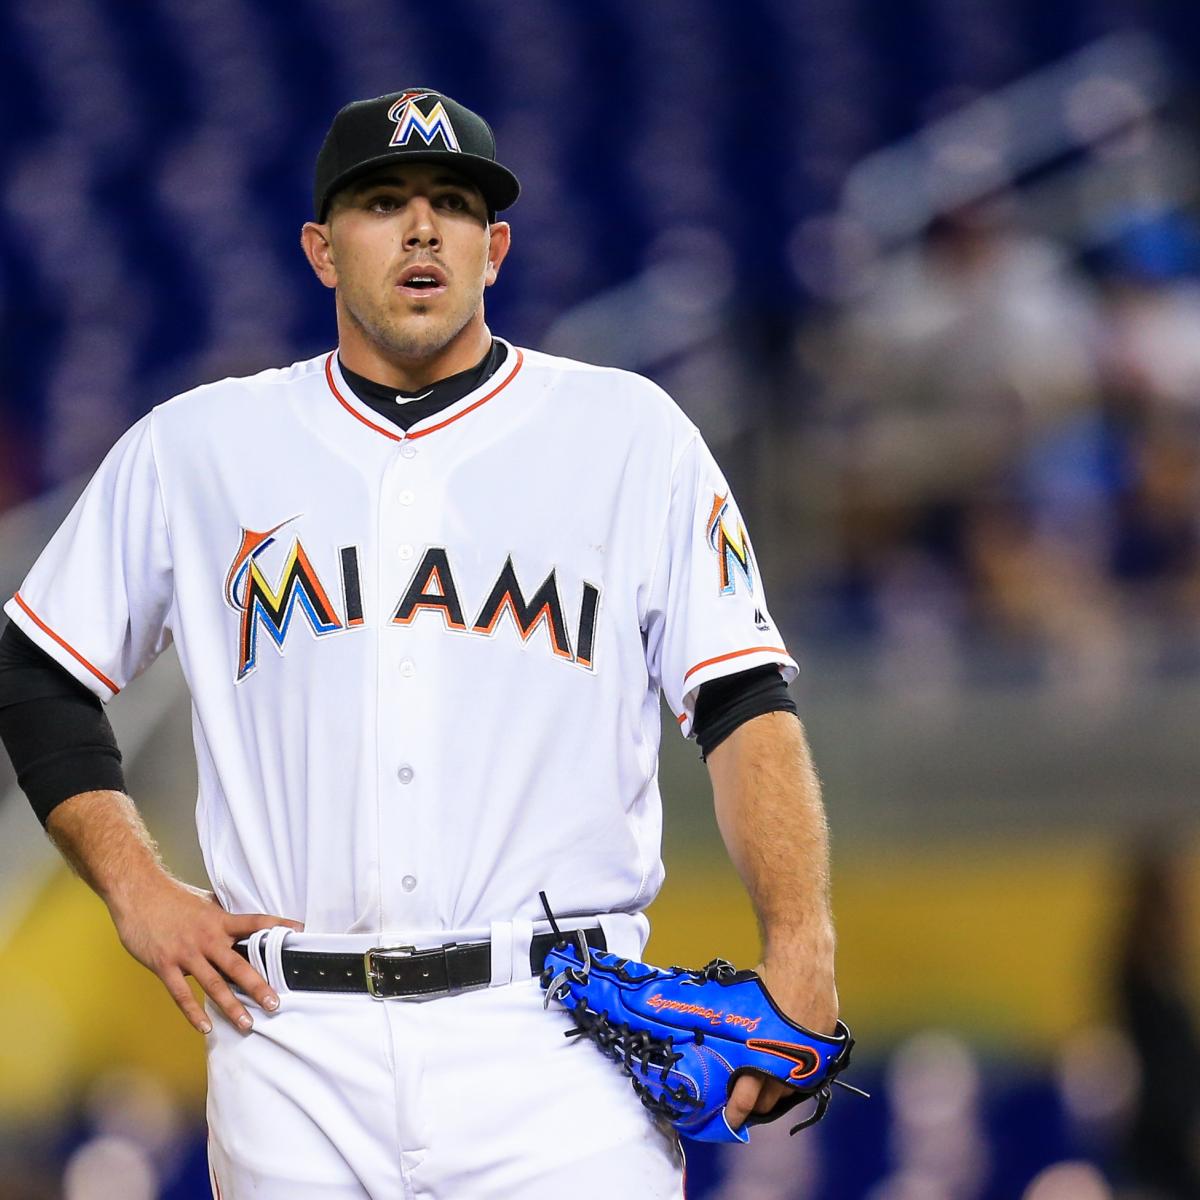 Jose Fernandez, Miami Marlins ace pitcher, dies in boating accident at 24